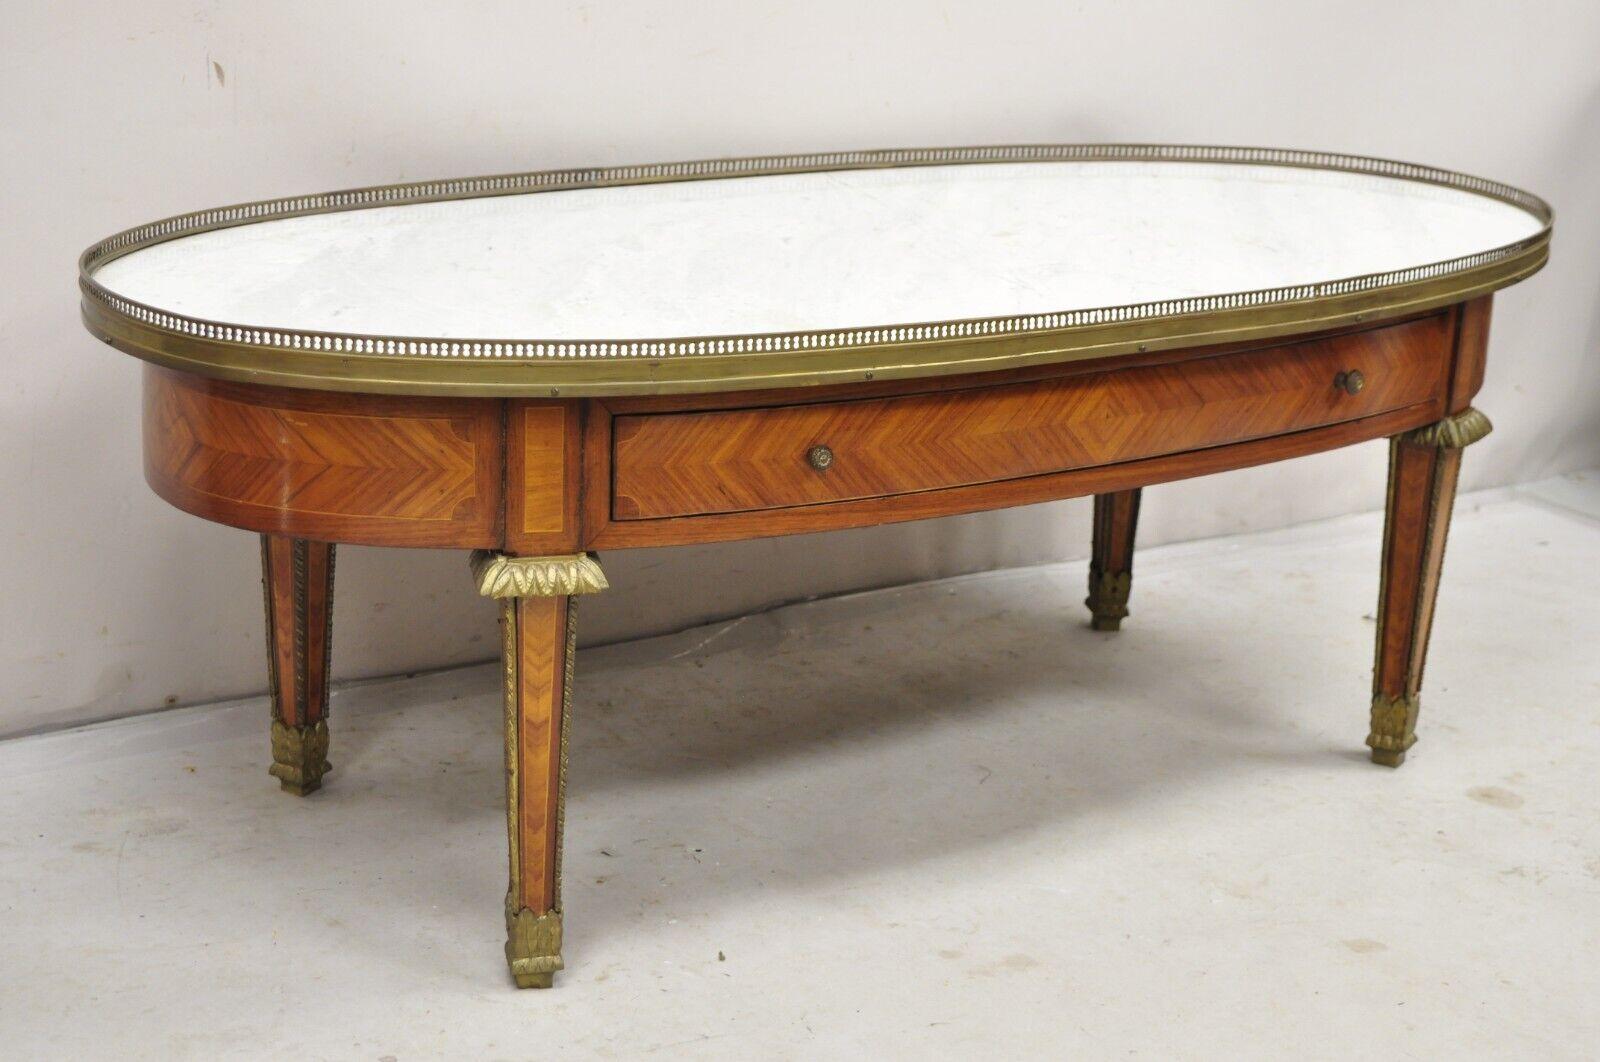 Vintage French Louis XVI Style Oval Marble Top Bronze & Satinwood Coffee Table w/ Drawer. Item features an ornate bronze ormolu mounts and gallery, single drawer, inlaid and finished on all sides, very impressive French coffee table. Circa 1930s.